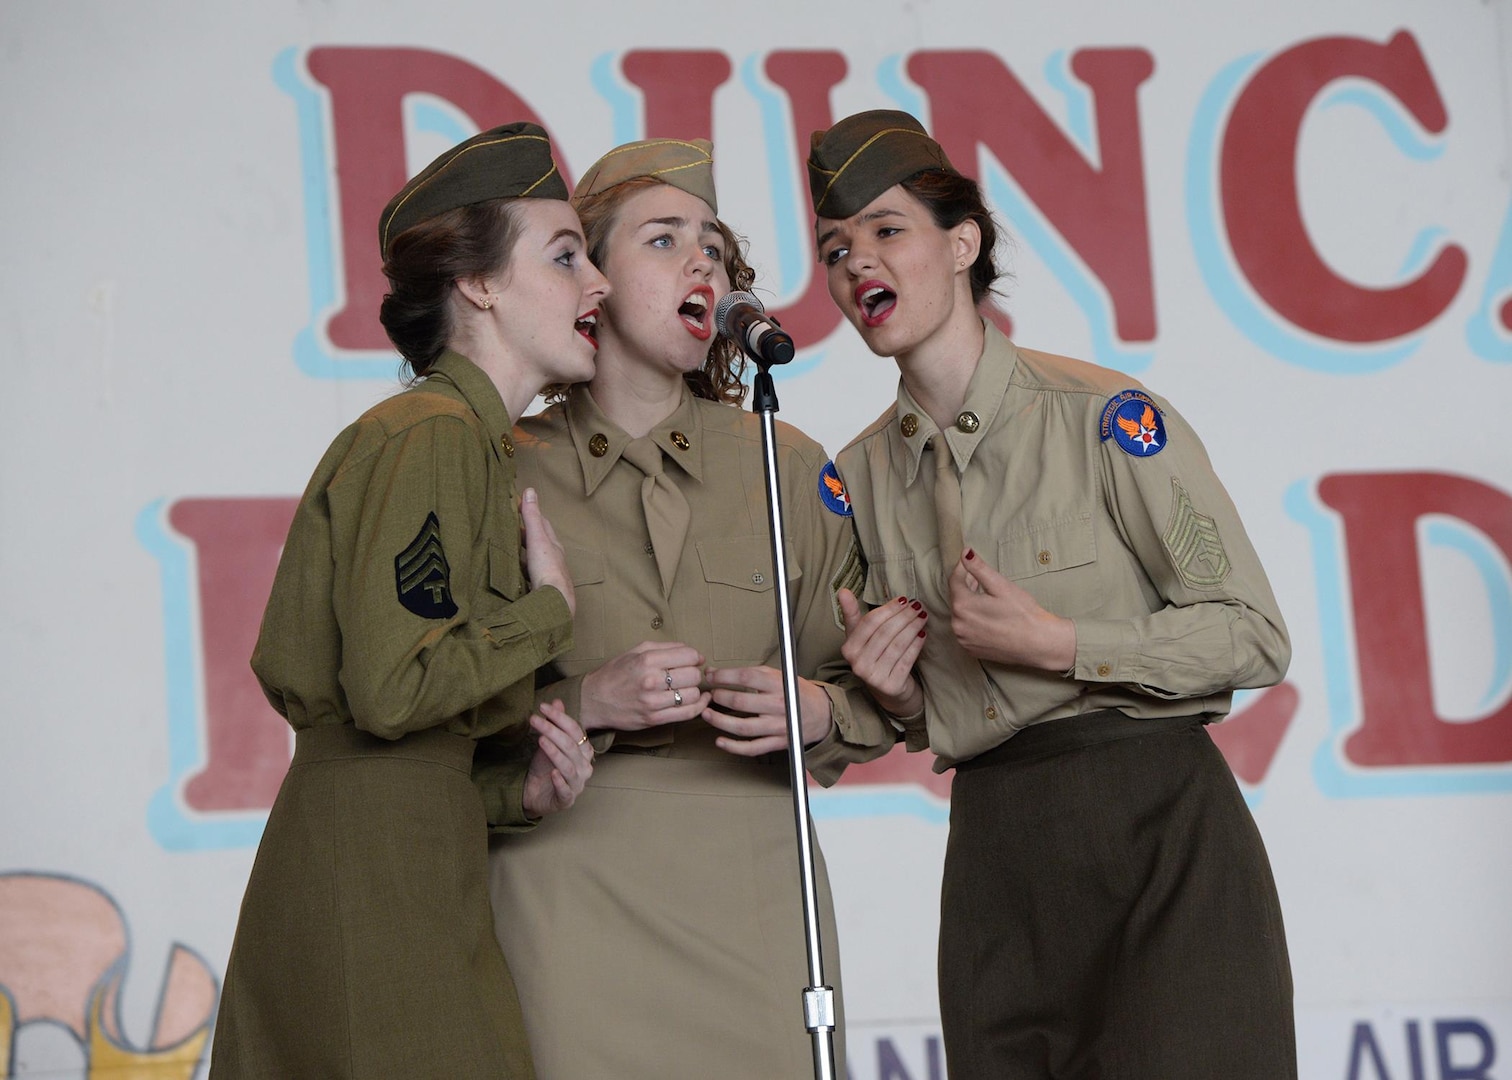 The Dillard Sisters perform during the 2017 Joint Base San Antonio Air Show and Open House Nov. 4, at JBSA-Lackland, Kelly Field Annex.  Air shows allow the Air Force to display the capabilities of our aircraft to the American taxpayer through aerial demonstrations and static displays.  The air show gives attendees an opportunity to get up close and personal to see some of the equipment and aircraft used by the U.S. military today. (U.S. Air Force photo by Melissa Peterson/Released)